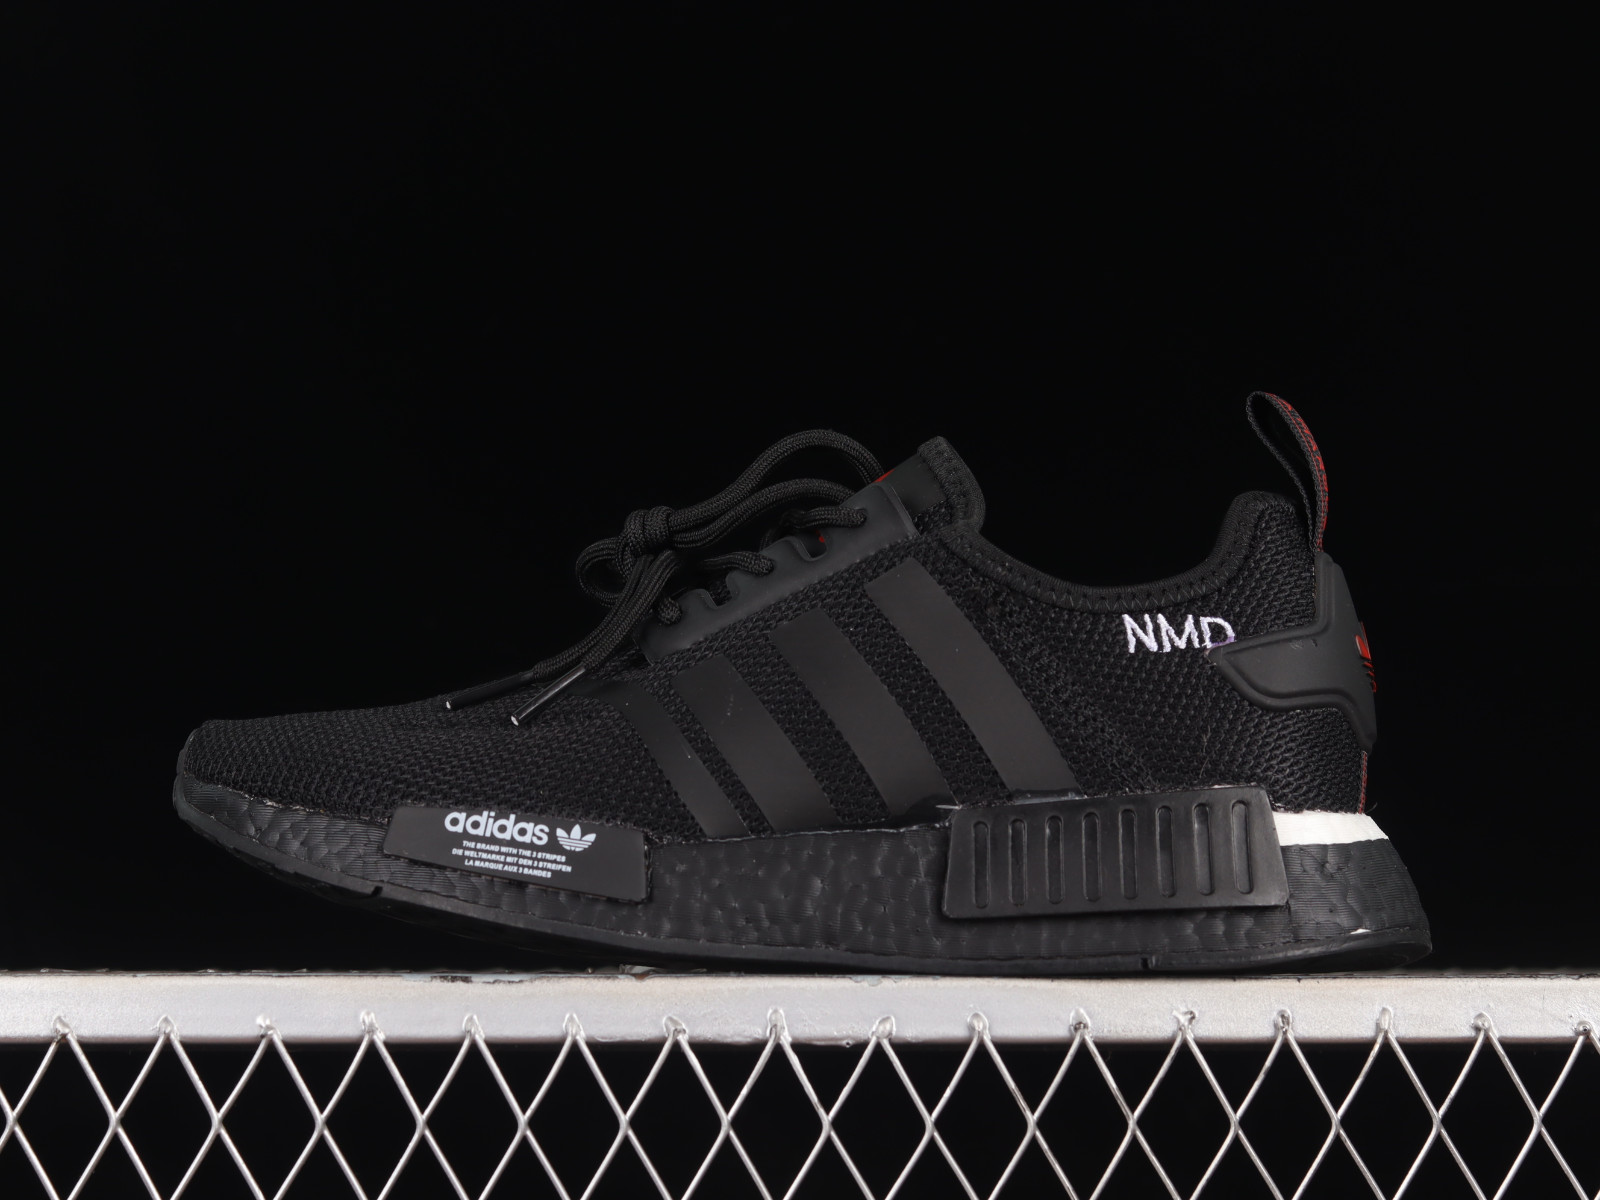 Adidas nmd NMD R1 Boost Core Black White Red HQ2068 - Sepsale free giveaway 2018 live chat